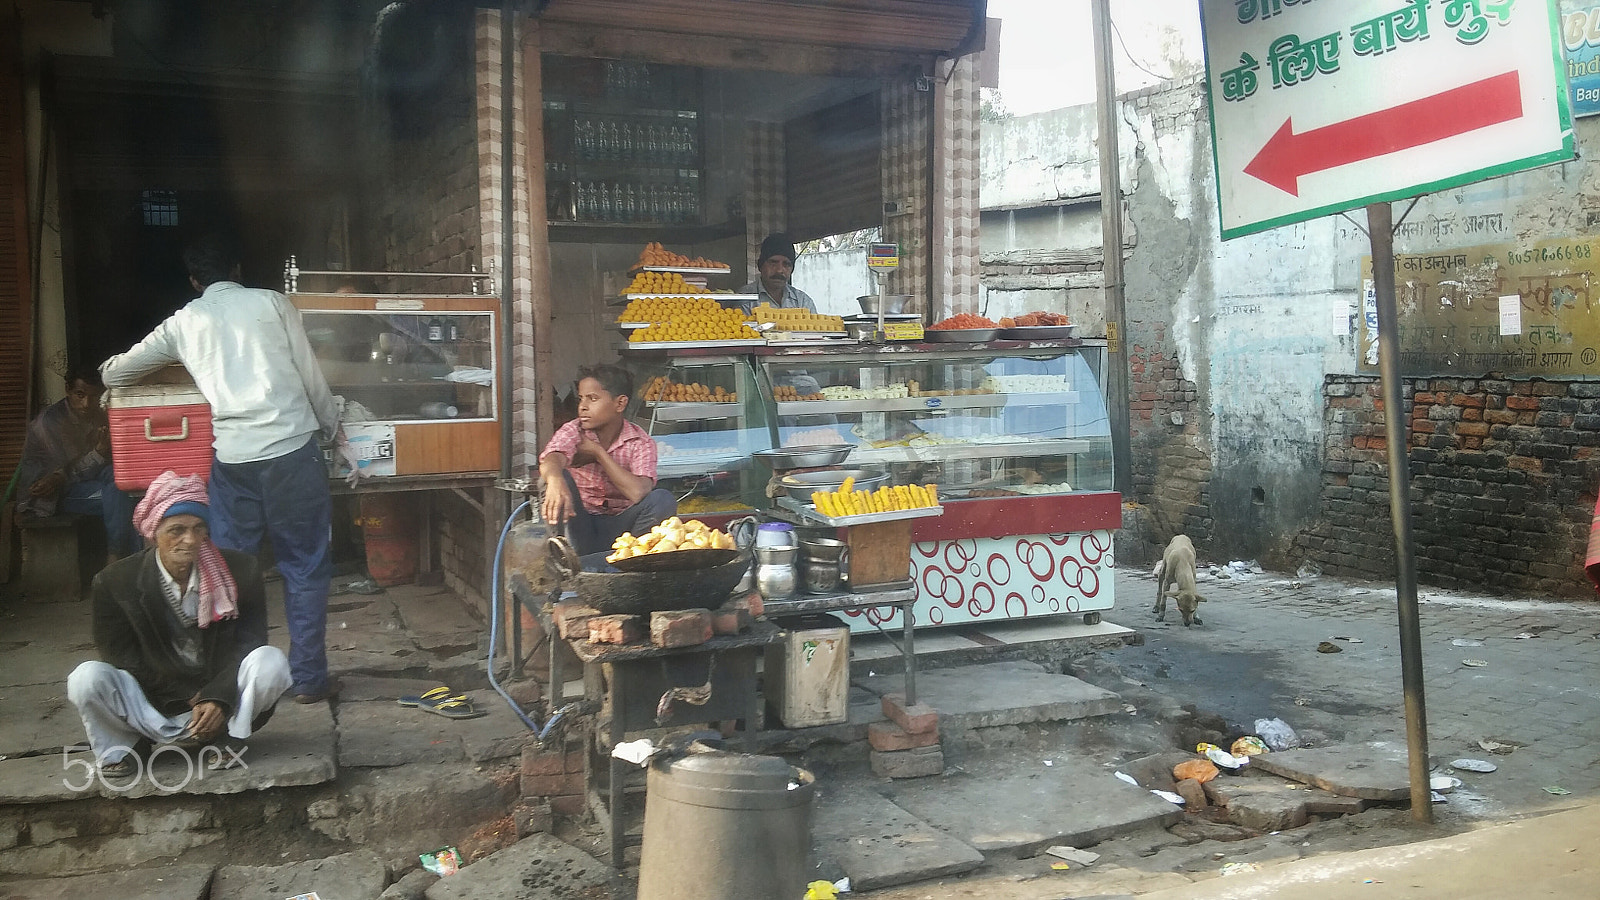 LG G Pro2 sample photo. Food hawkers in india photography